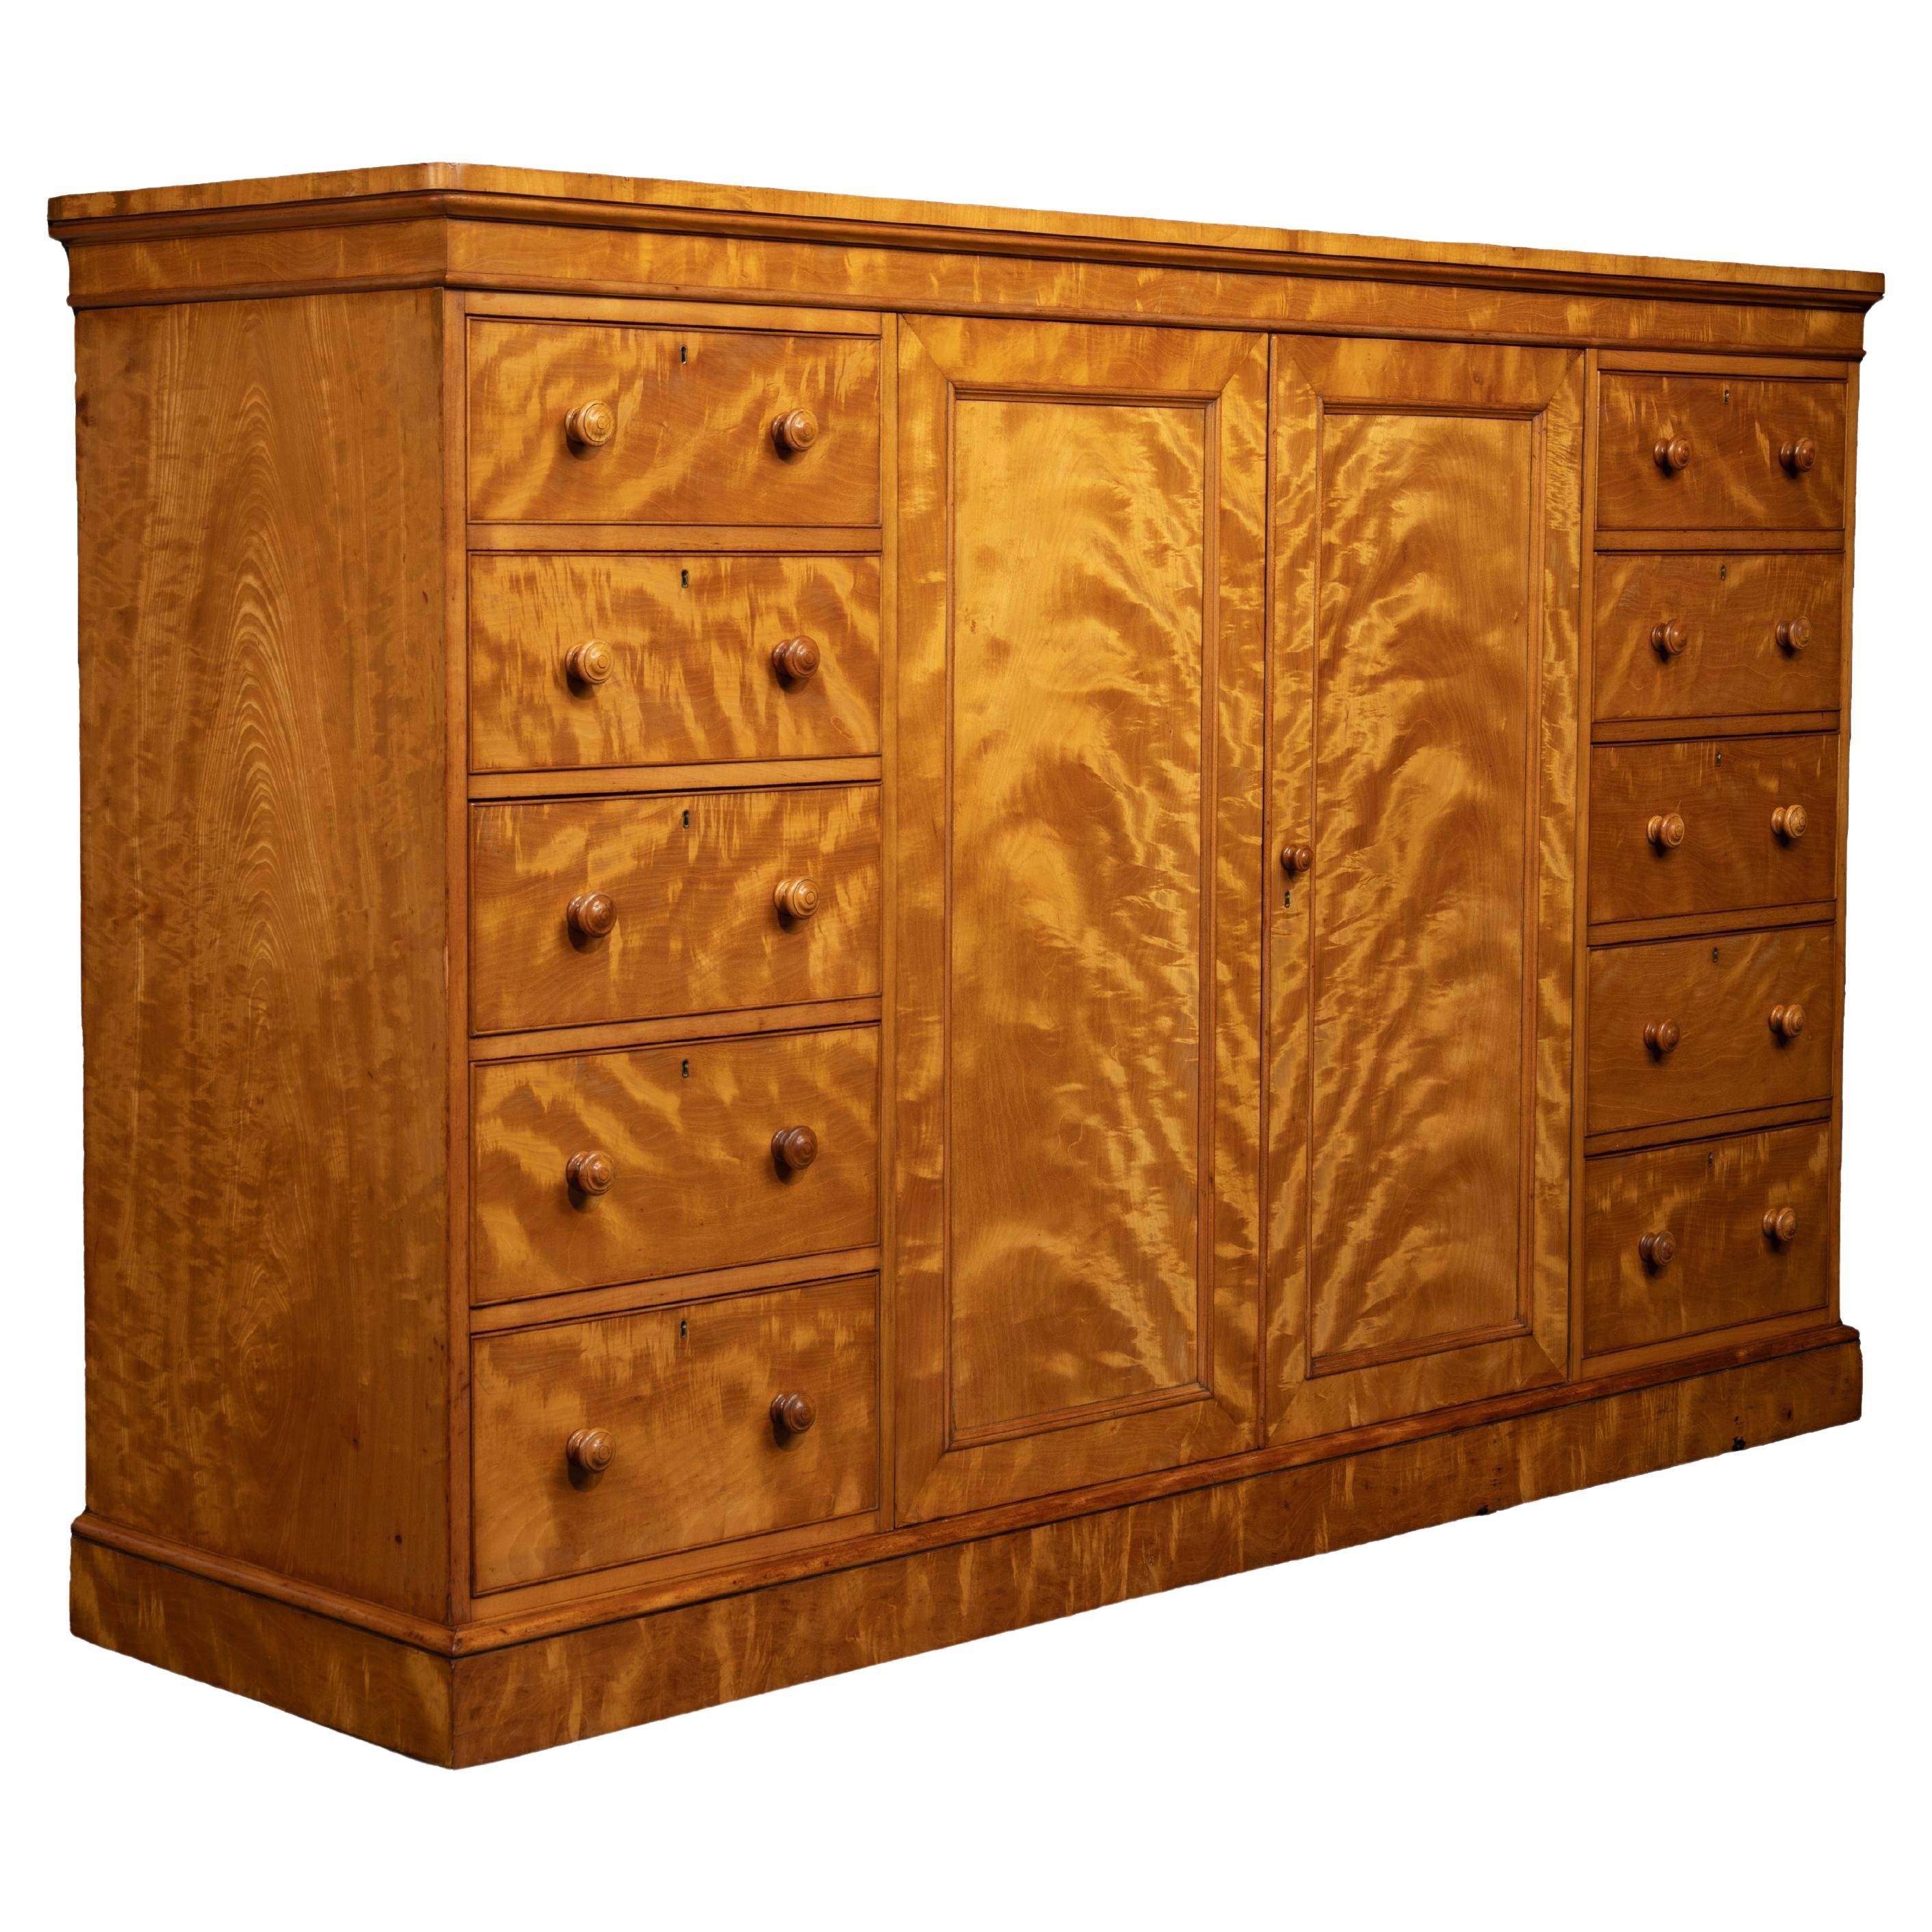 West Indian Satinwood Gentleman’s Compactum/Press Attributed to Holland & Sons For Sale